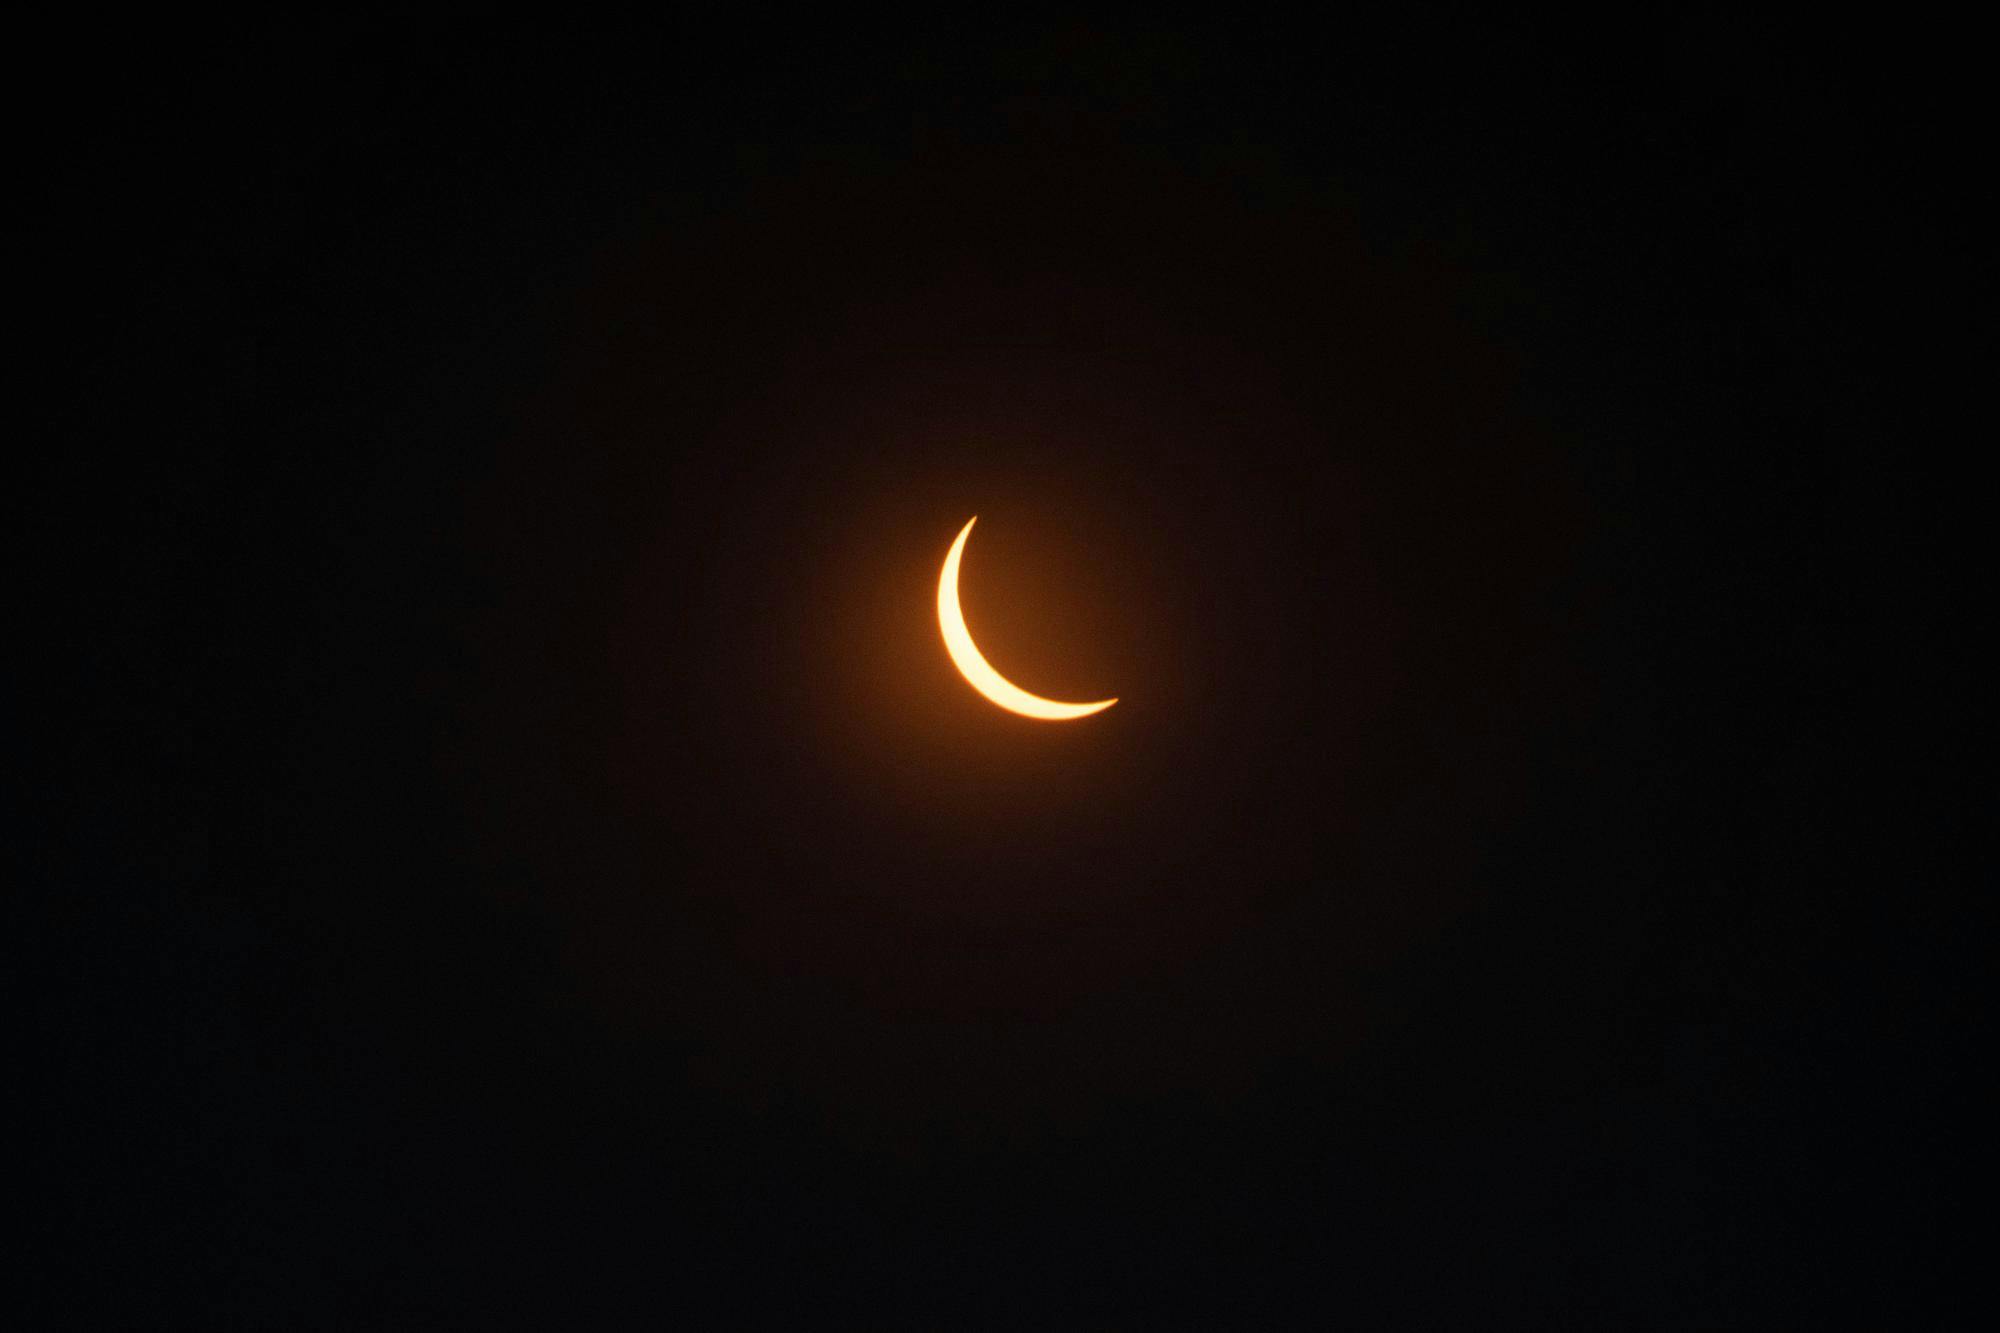 The moon covers nearly all of the sun, appearing as black darkness with a crescent sliver of orange glow showing.